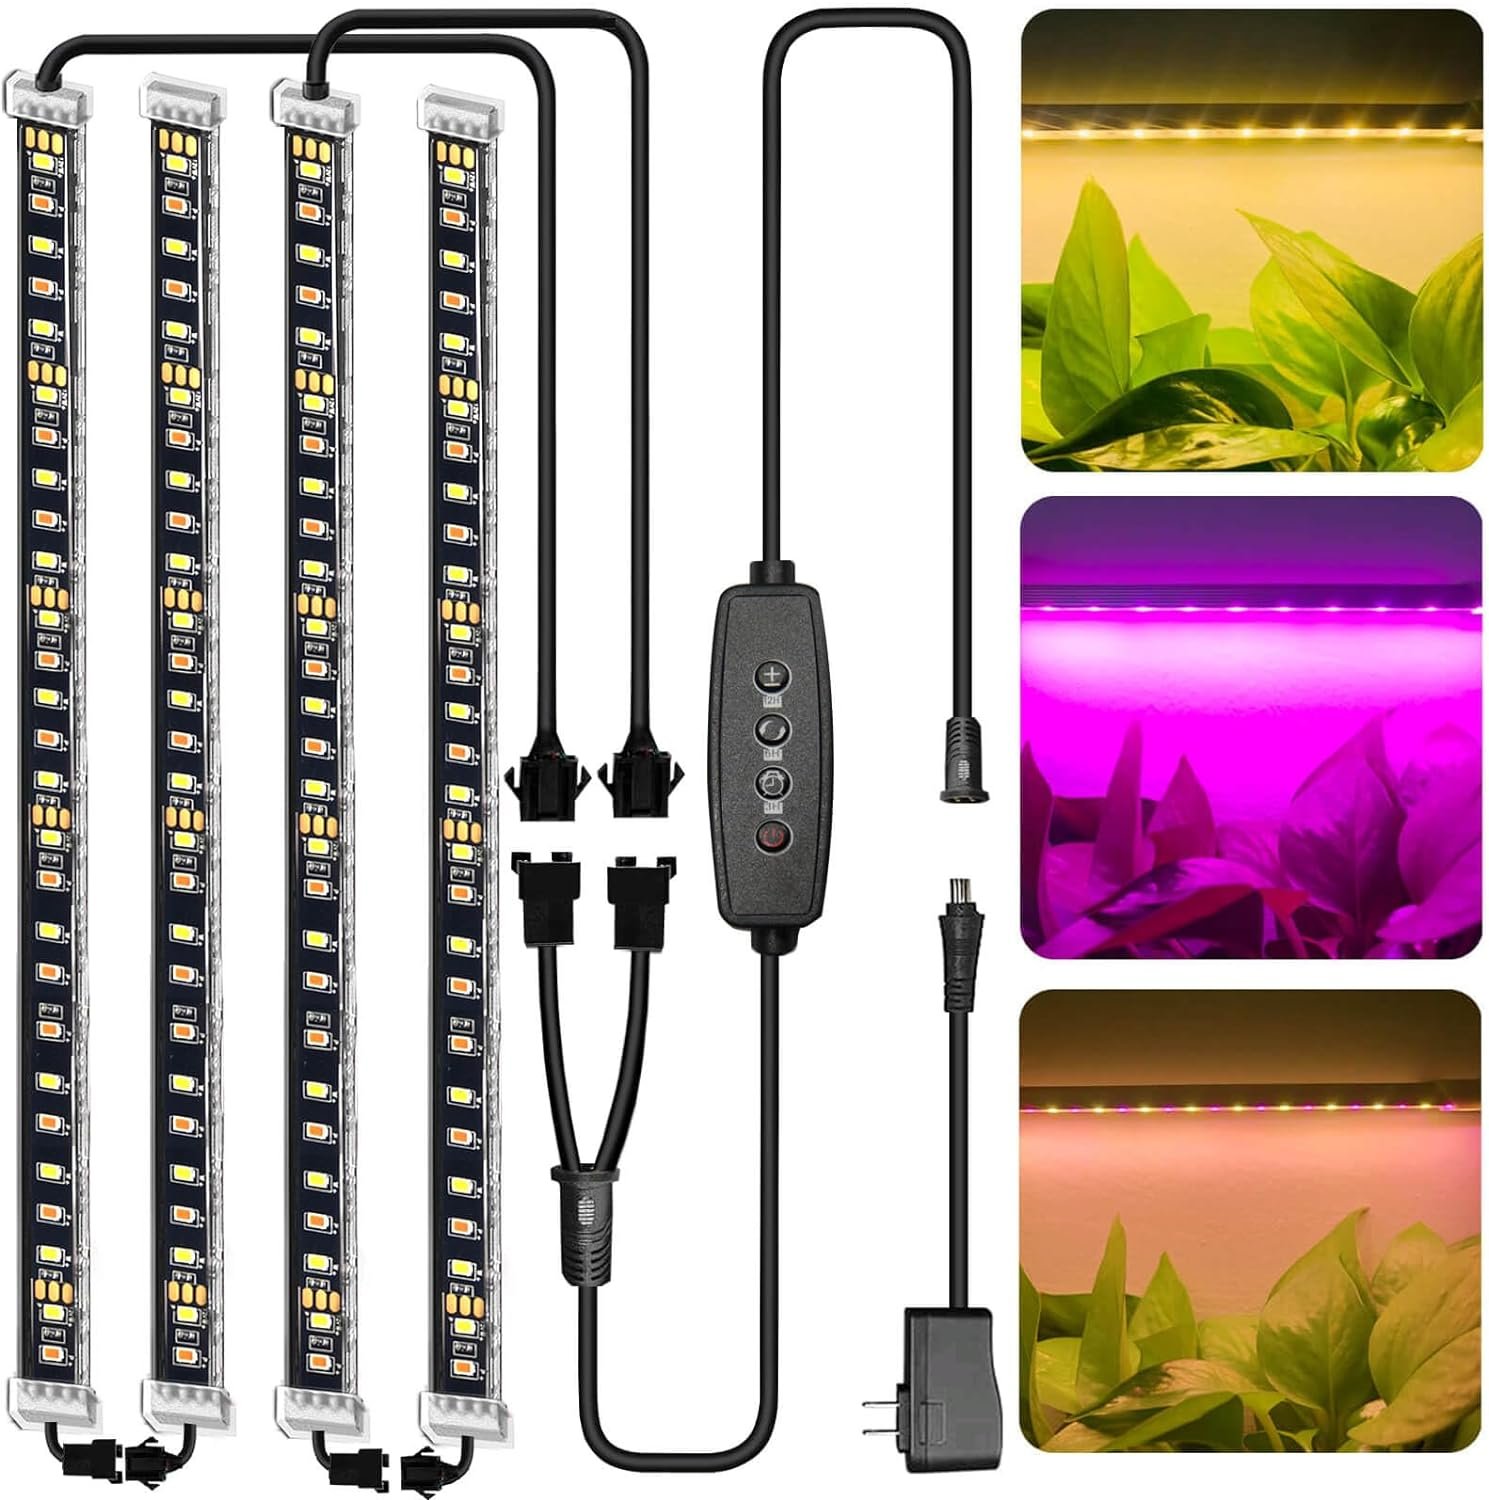 Grow Light for Indoor Plants Abonnyc 96 LEDS Plant Grow Light Strips 10 Inch Warm White Light  Red Light Full Spectrum with Auto On/Off Timer Sunlike Small Grow Lamp for Hydroponics Succulent, 4 Bars